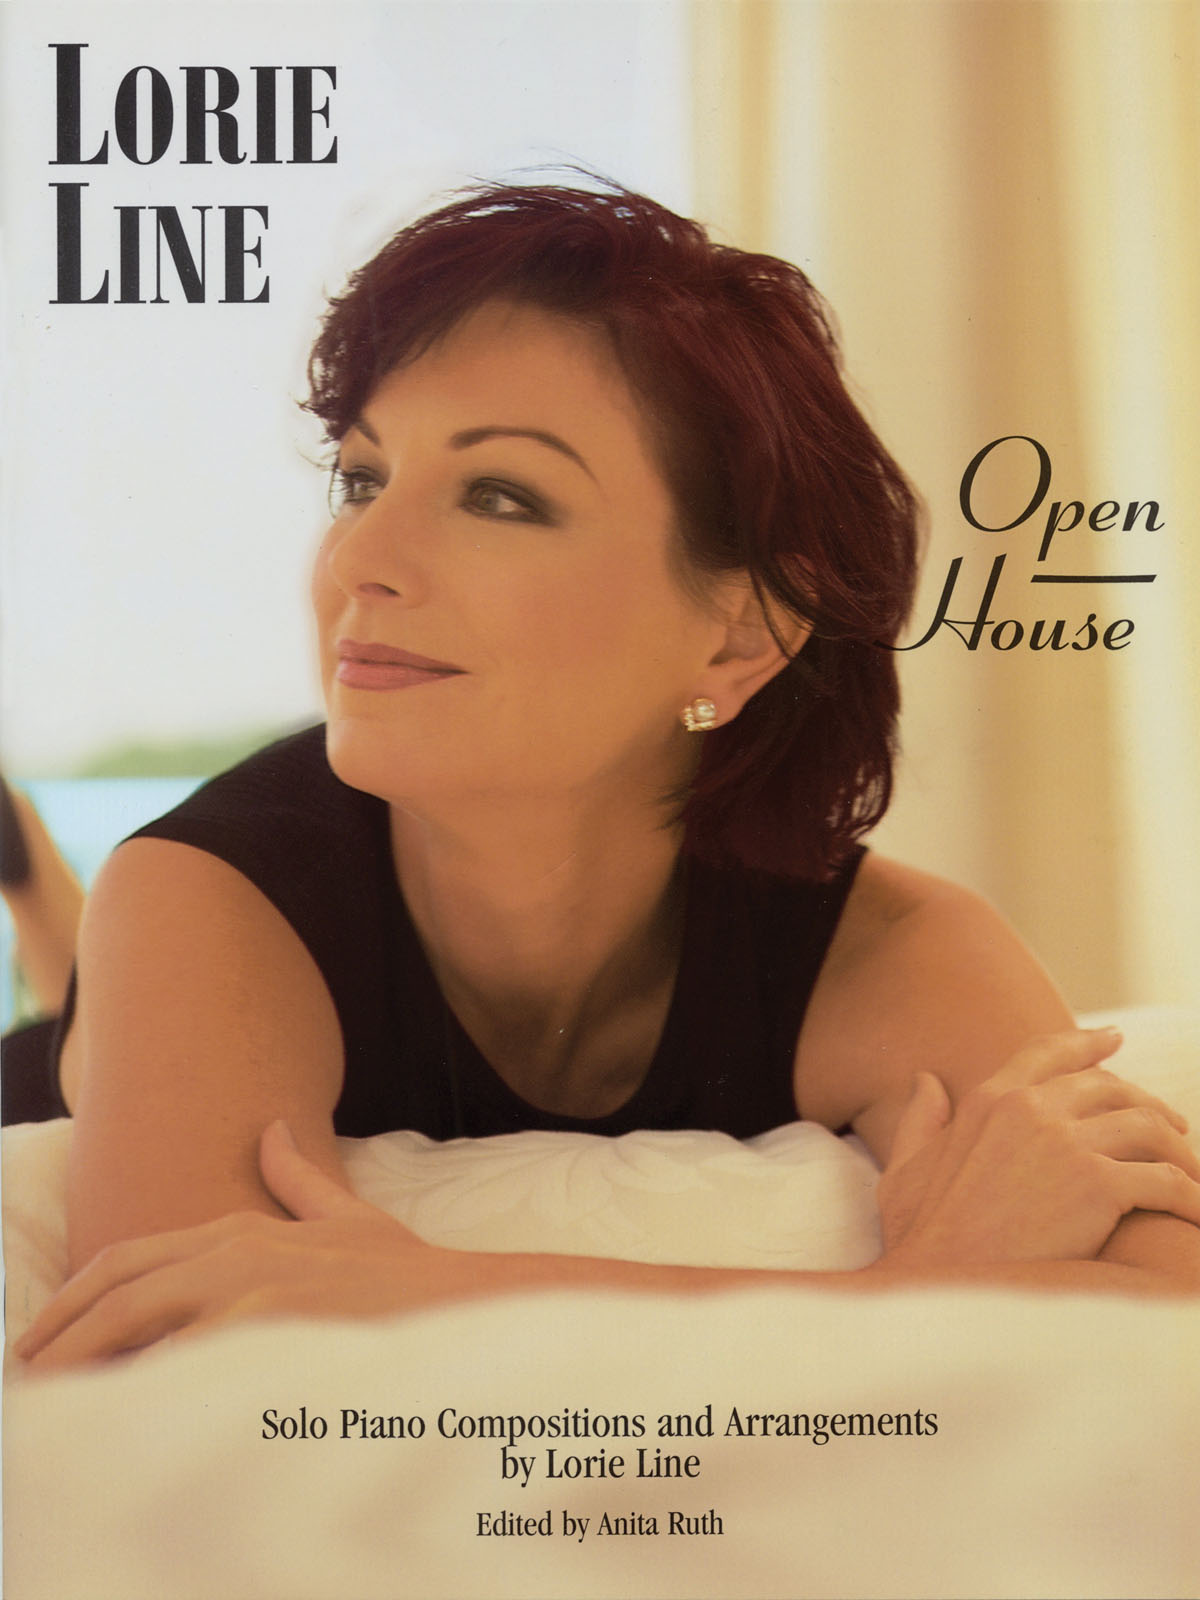 Lorie Line – Open House(Solo Piano Compositions and Arrangements)